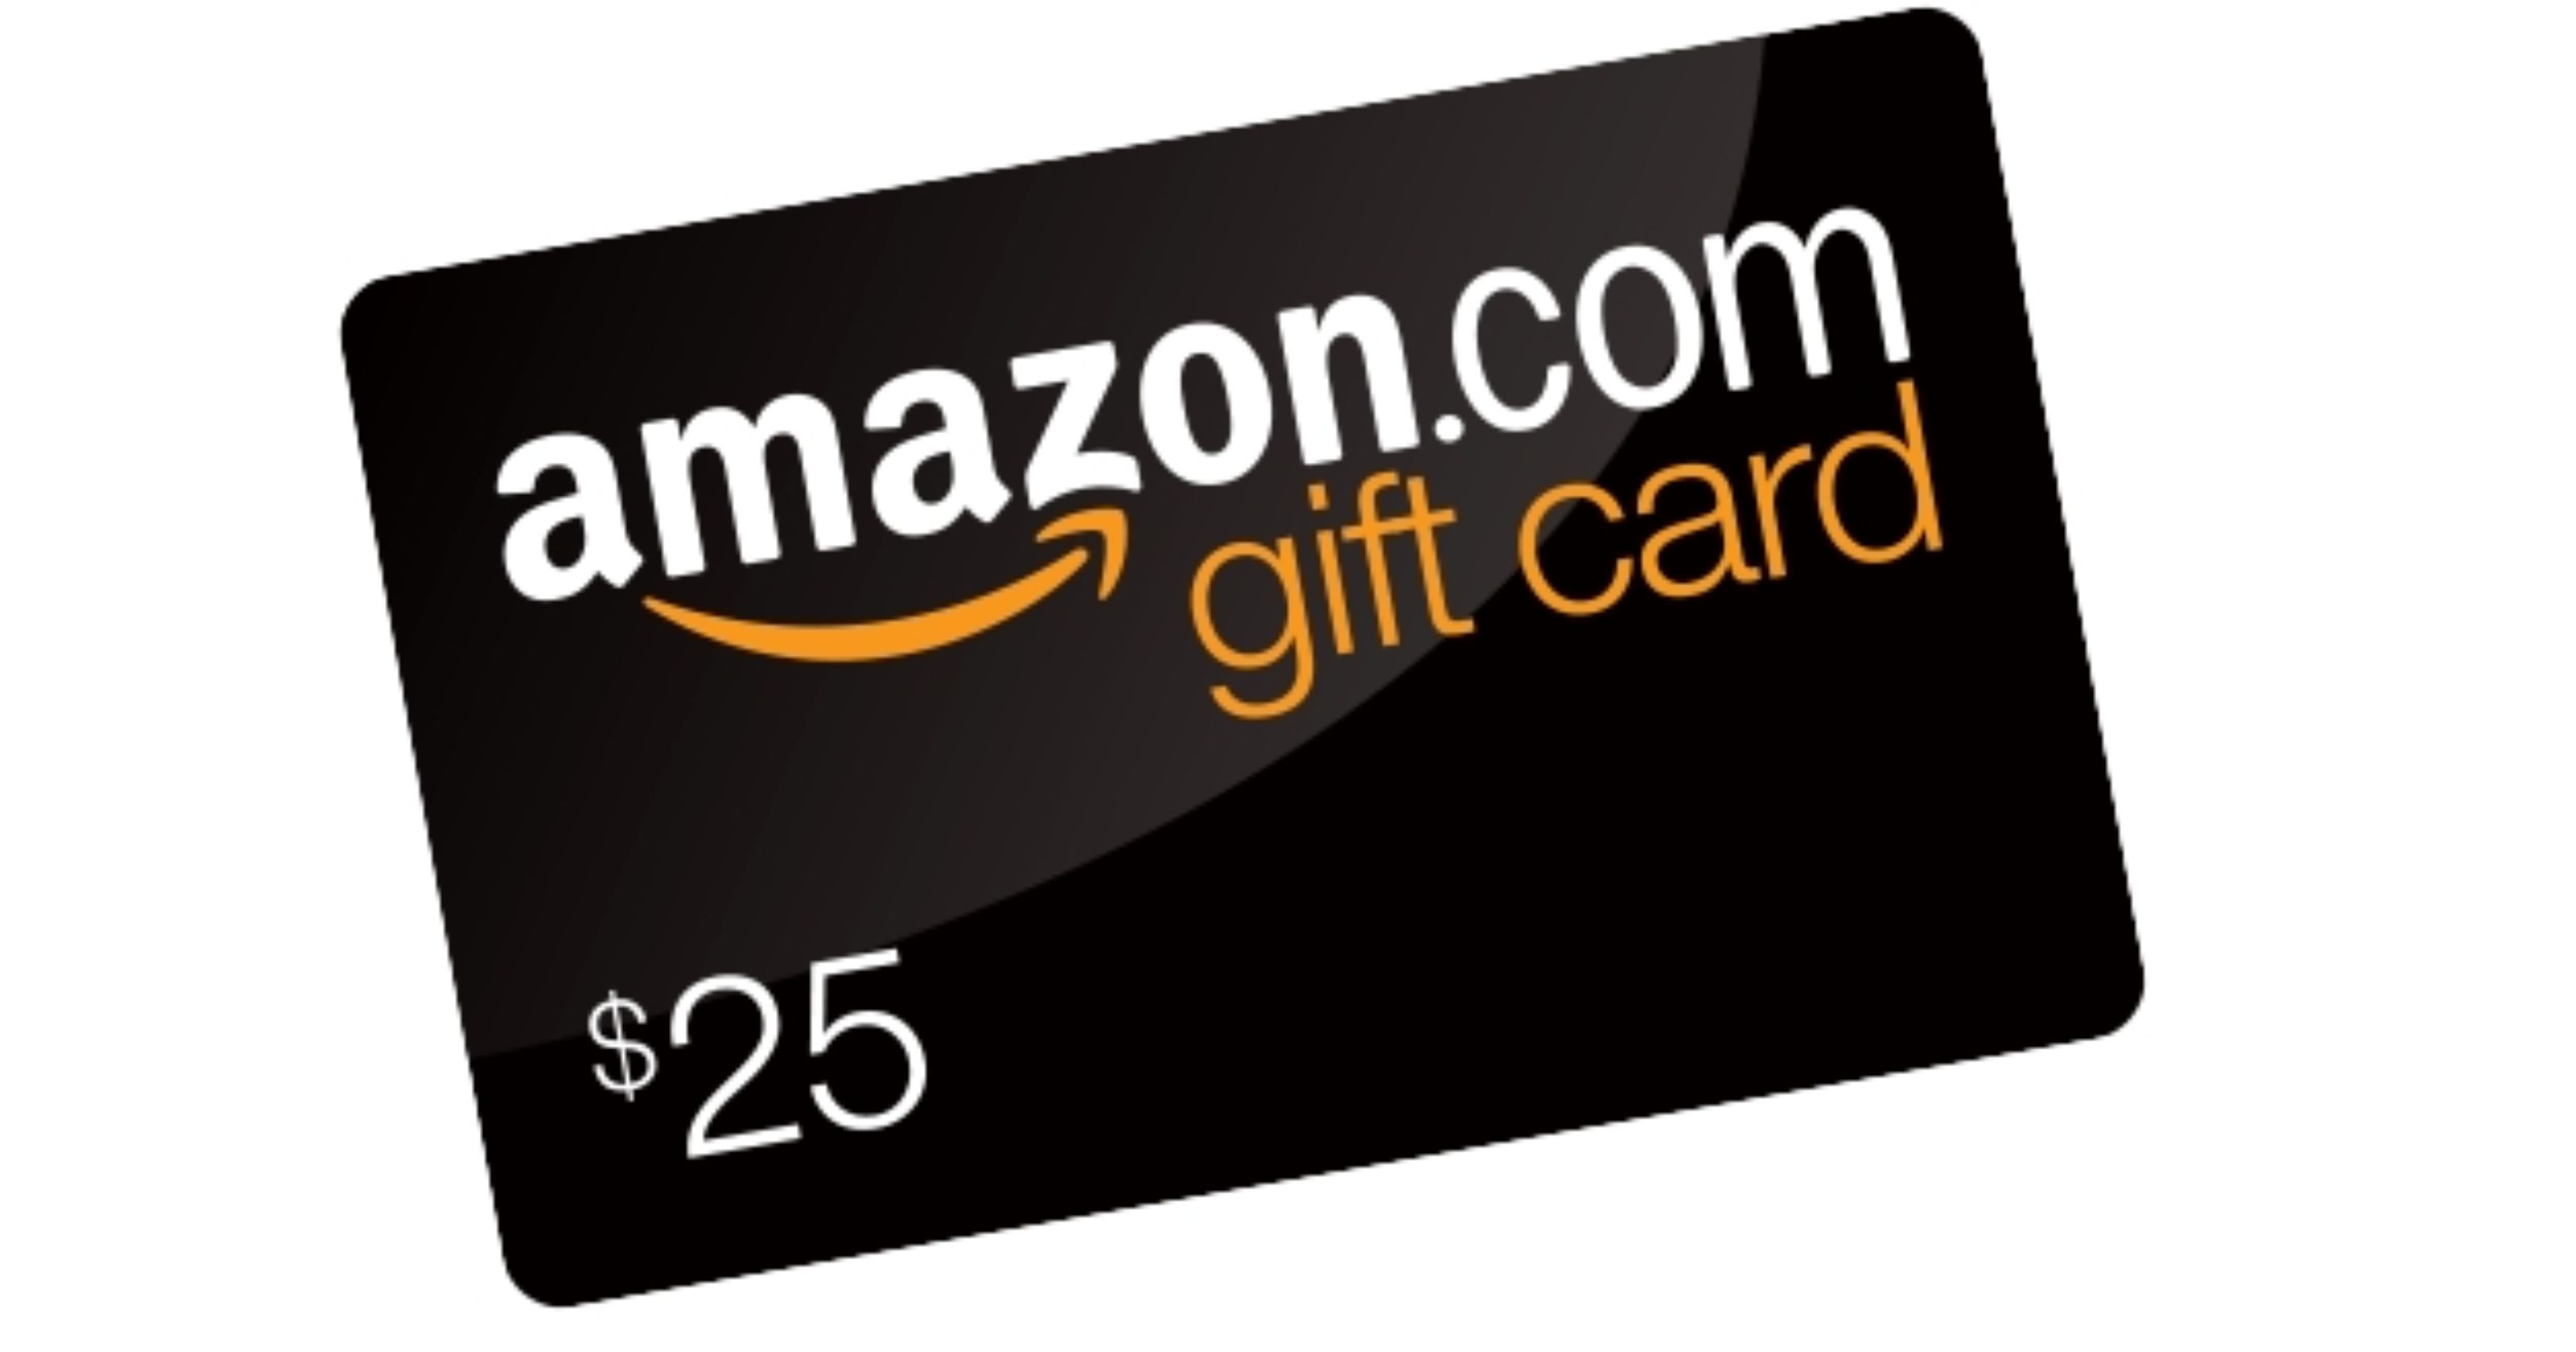 50-amazon-gift-card-giveaway-new-age-of-e-commerce-automation-e